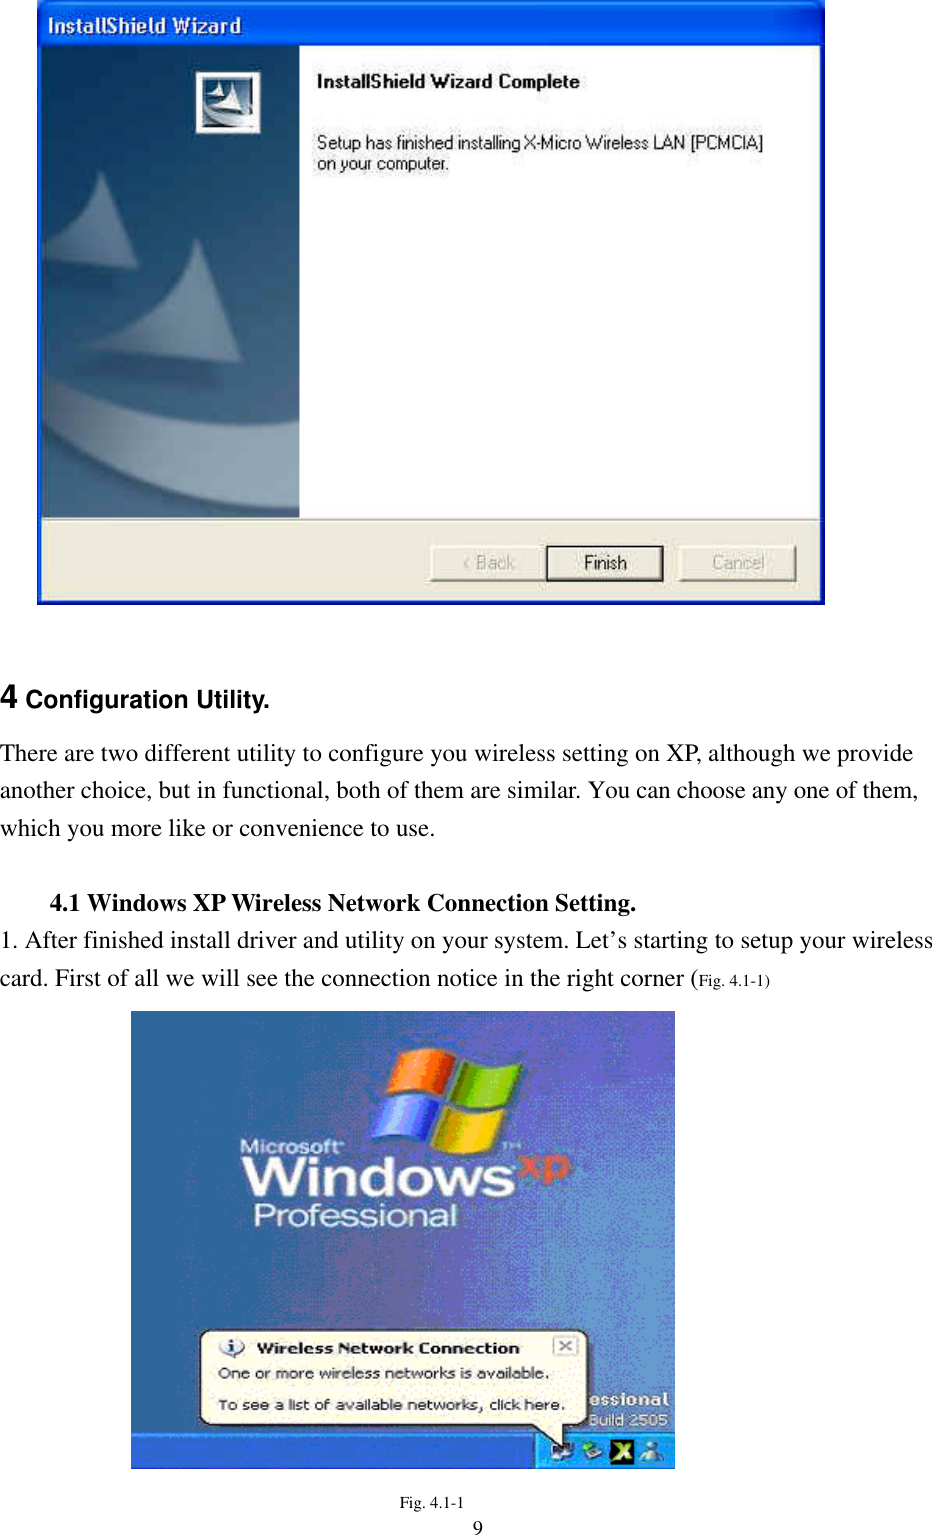 94 Configuration Utility.There are two different utility to configure you wireless setting on XP, although we provideanother choice, but in functional, both of them are similar. You can choose any one of them,which you more like or convenience to use.4.1 Windows XP Wireless Network Connection Setting.1. After finished install driver and utility on your system. Let’s starting to setup your wirelesscard. First of all we will see the connection notice in the right corner (Fig. 4.1-1)Fig. 4.1-1